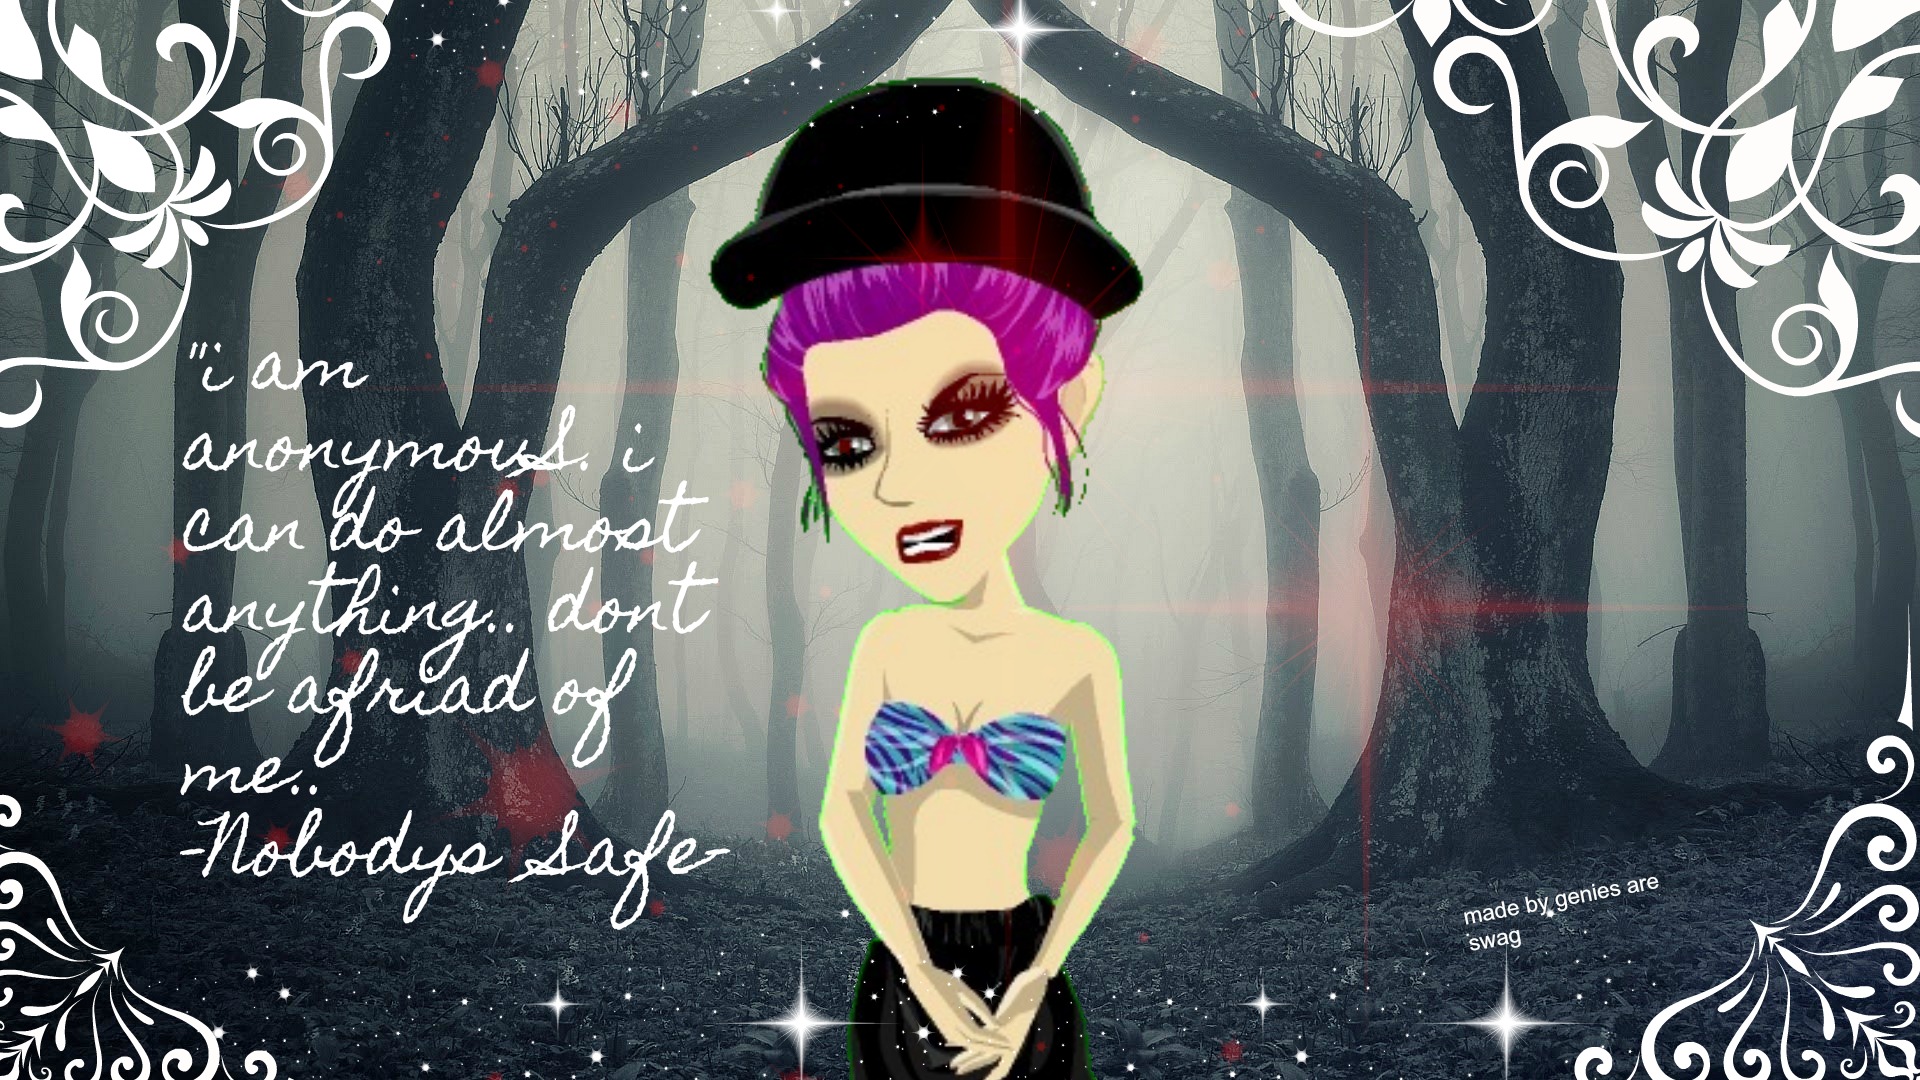 Image Anonymous msp  edit by genies are swag jpg MSP  